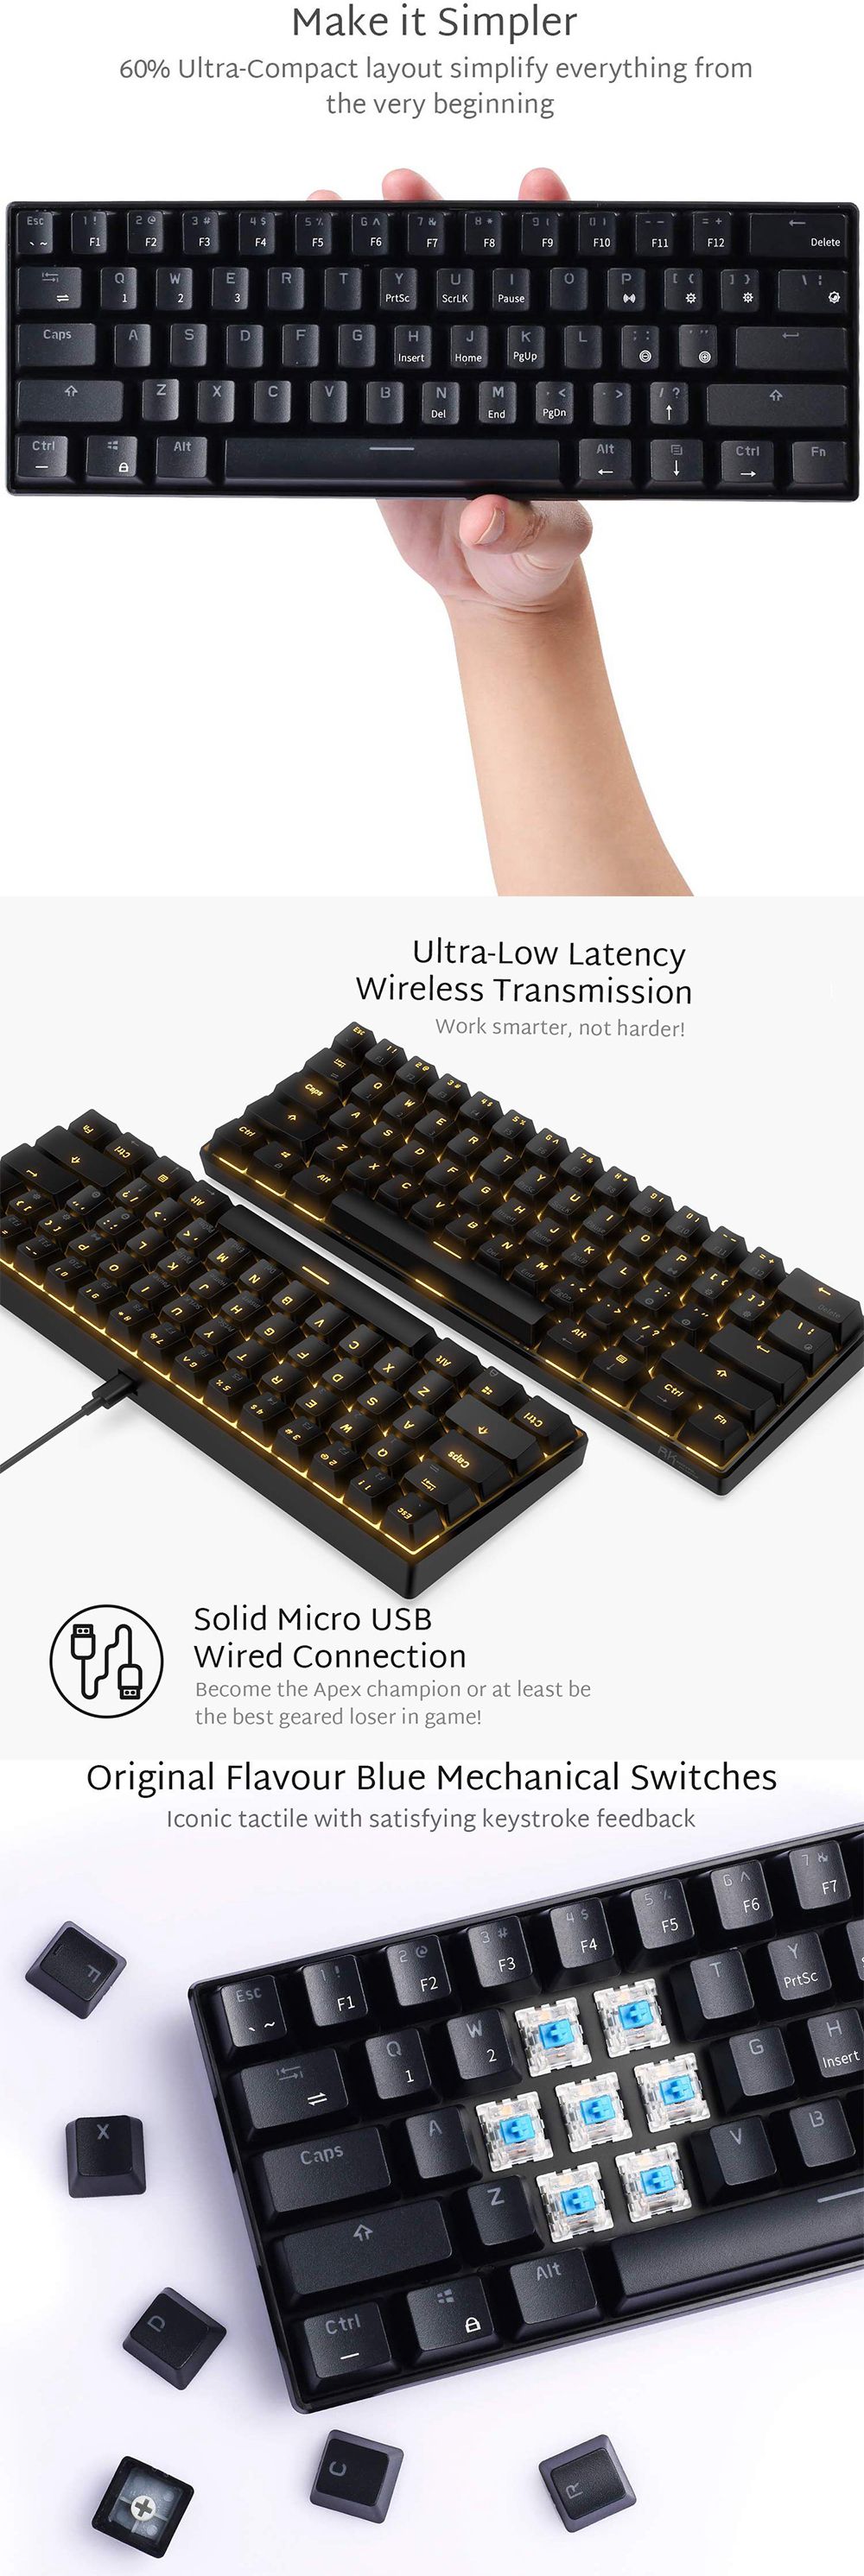 Royal-Kludge-RK61-bluetooth-Wired-Dual-Mode-60-Golden--Ice-Blue-Backlit-Mechanical-Gaming-Keyboard-1585831